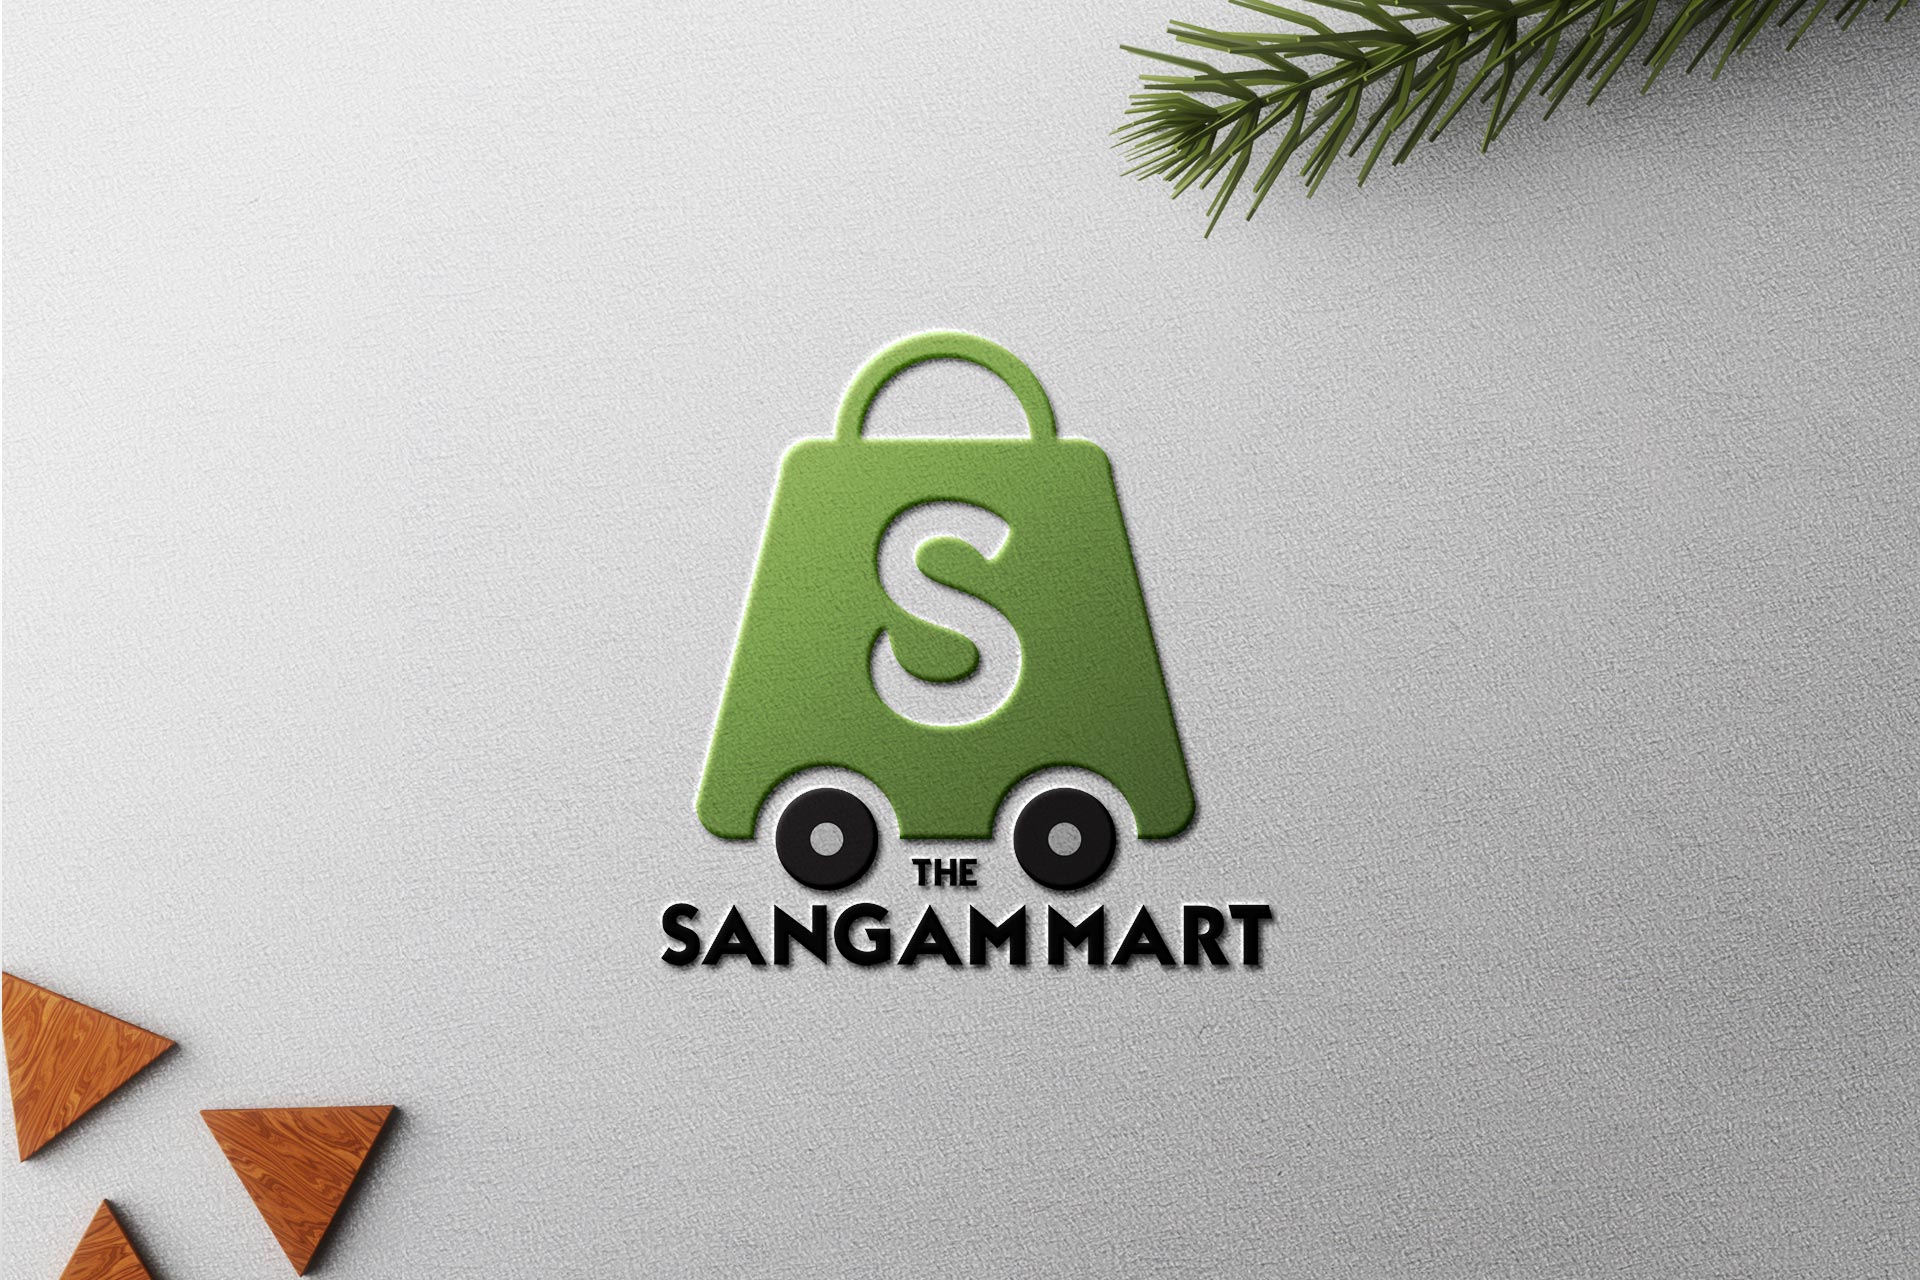 The Sangam Mart is an Online Ecommerce platform which mainly deals in grocery, vegetables etc. This logo is made with love by CodesGesture, best Logo Designing Company in Gorakhpur.